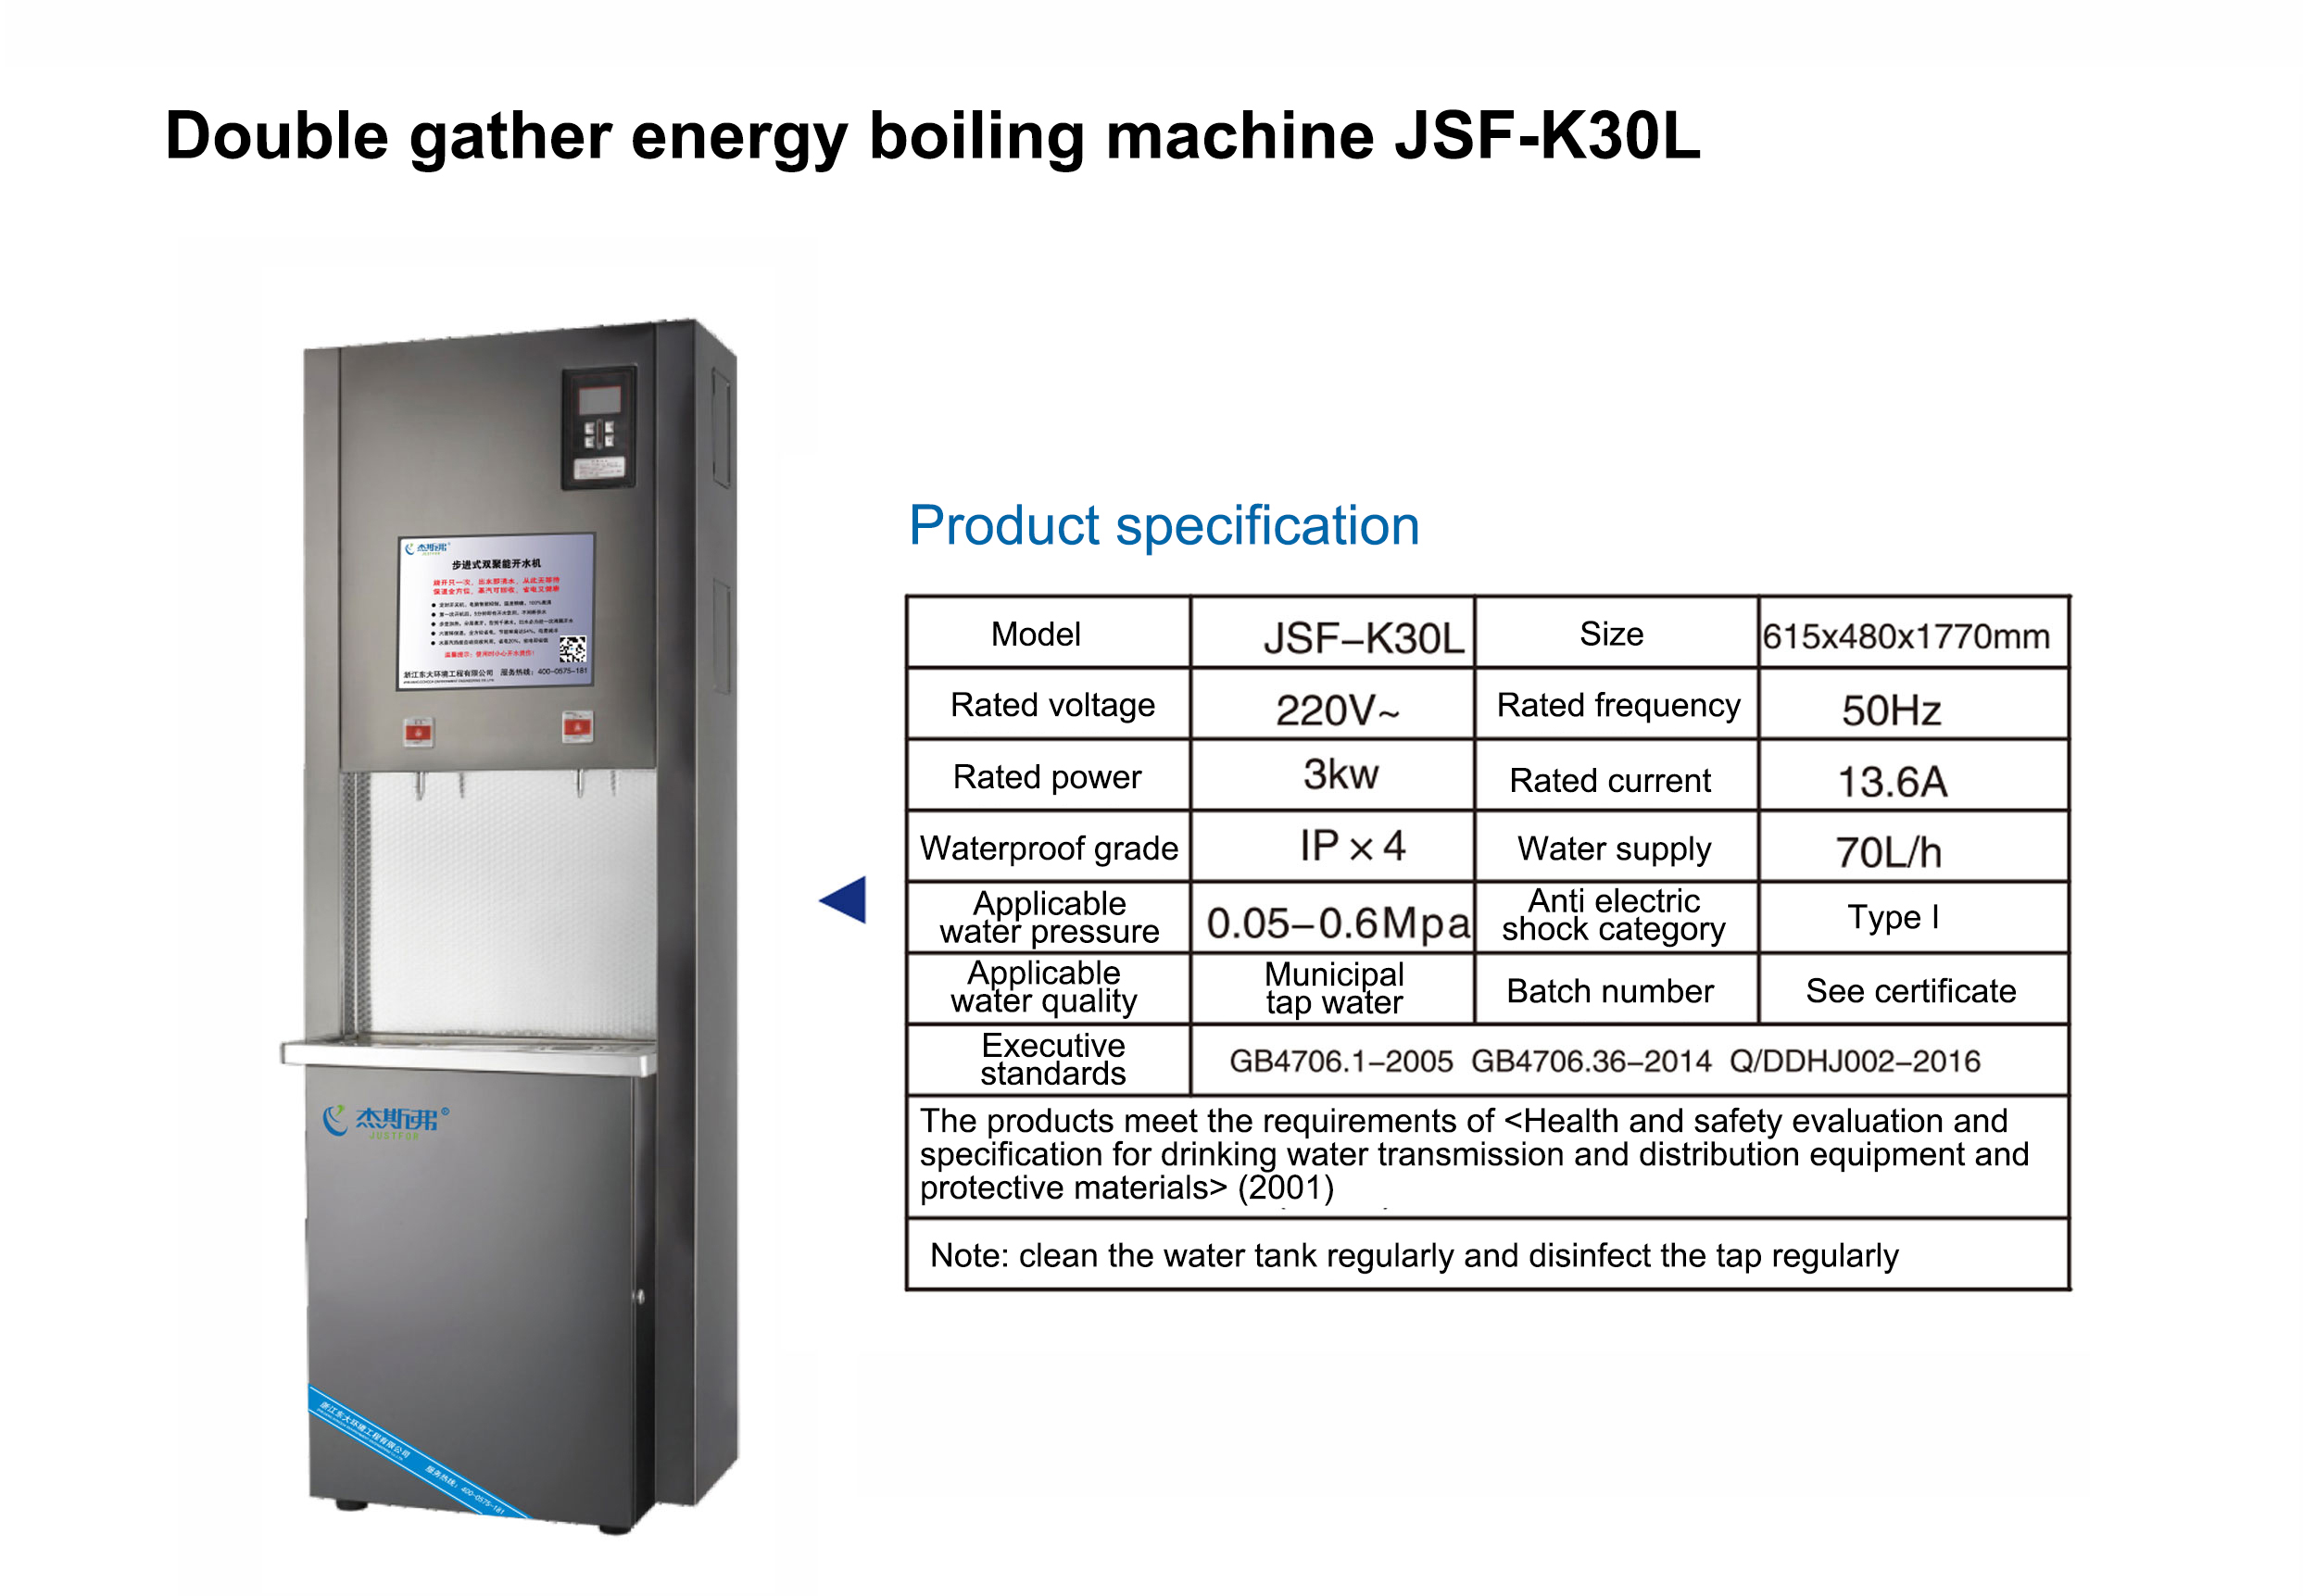 Double gather energy boiling machine（JSF-K30L）